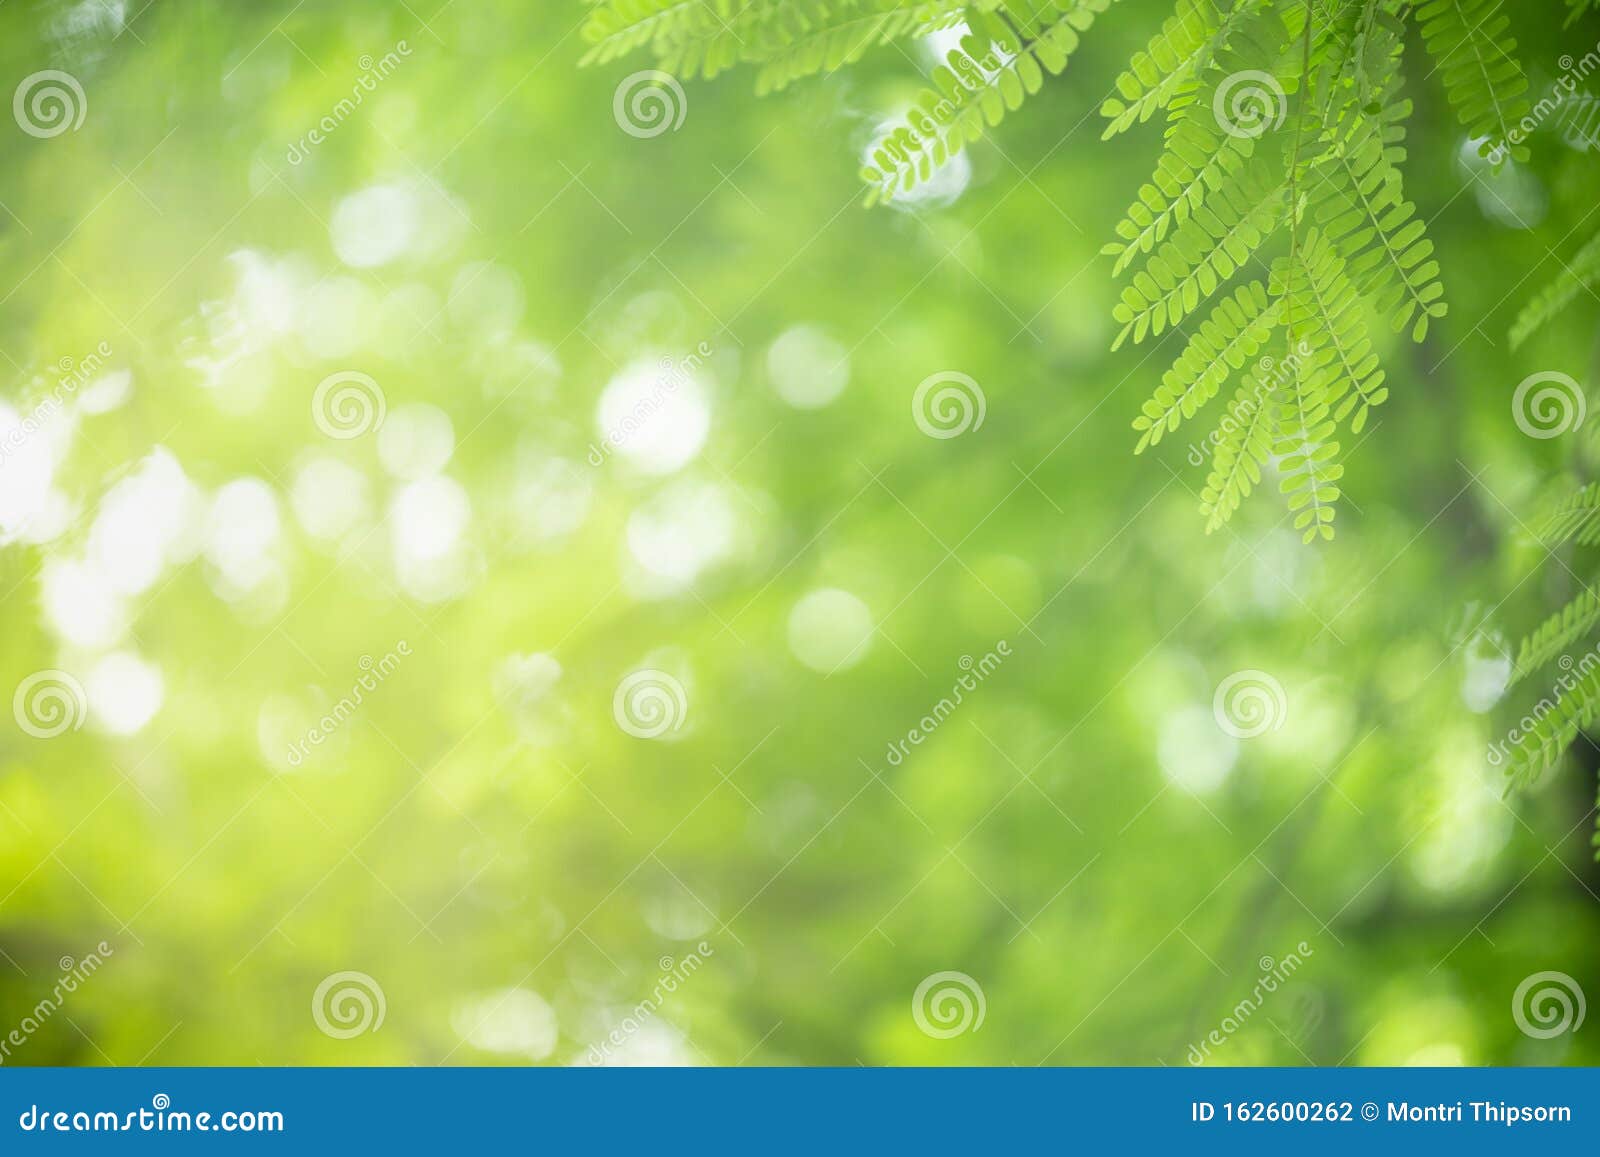 Close Up of Nature View Green Leaf on Blurred Greenery Background Under  Sunlight with Bokeh and Copy Space Using As Background Stock Photo - Image  of ecology, environmental: 162600262